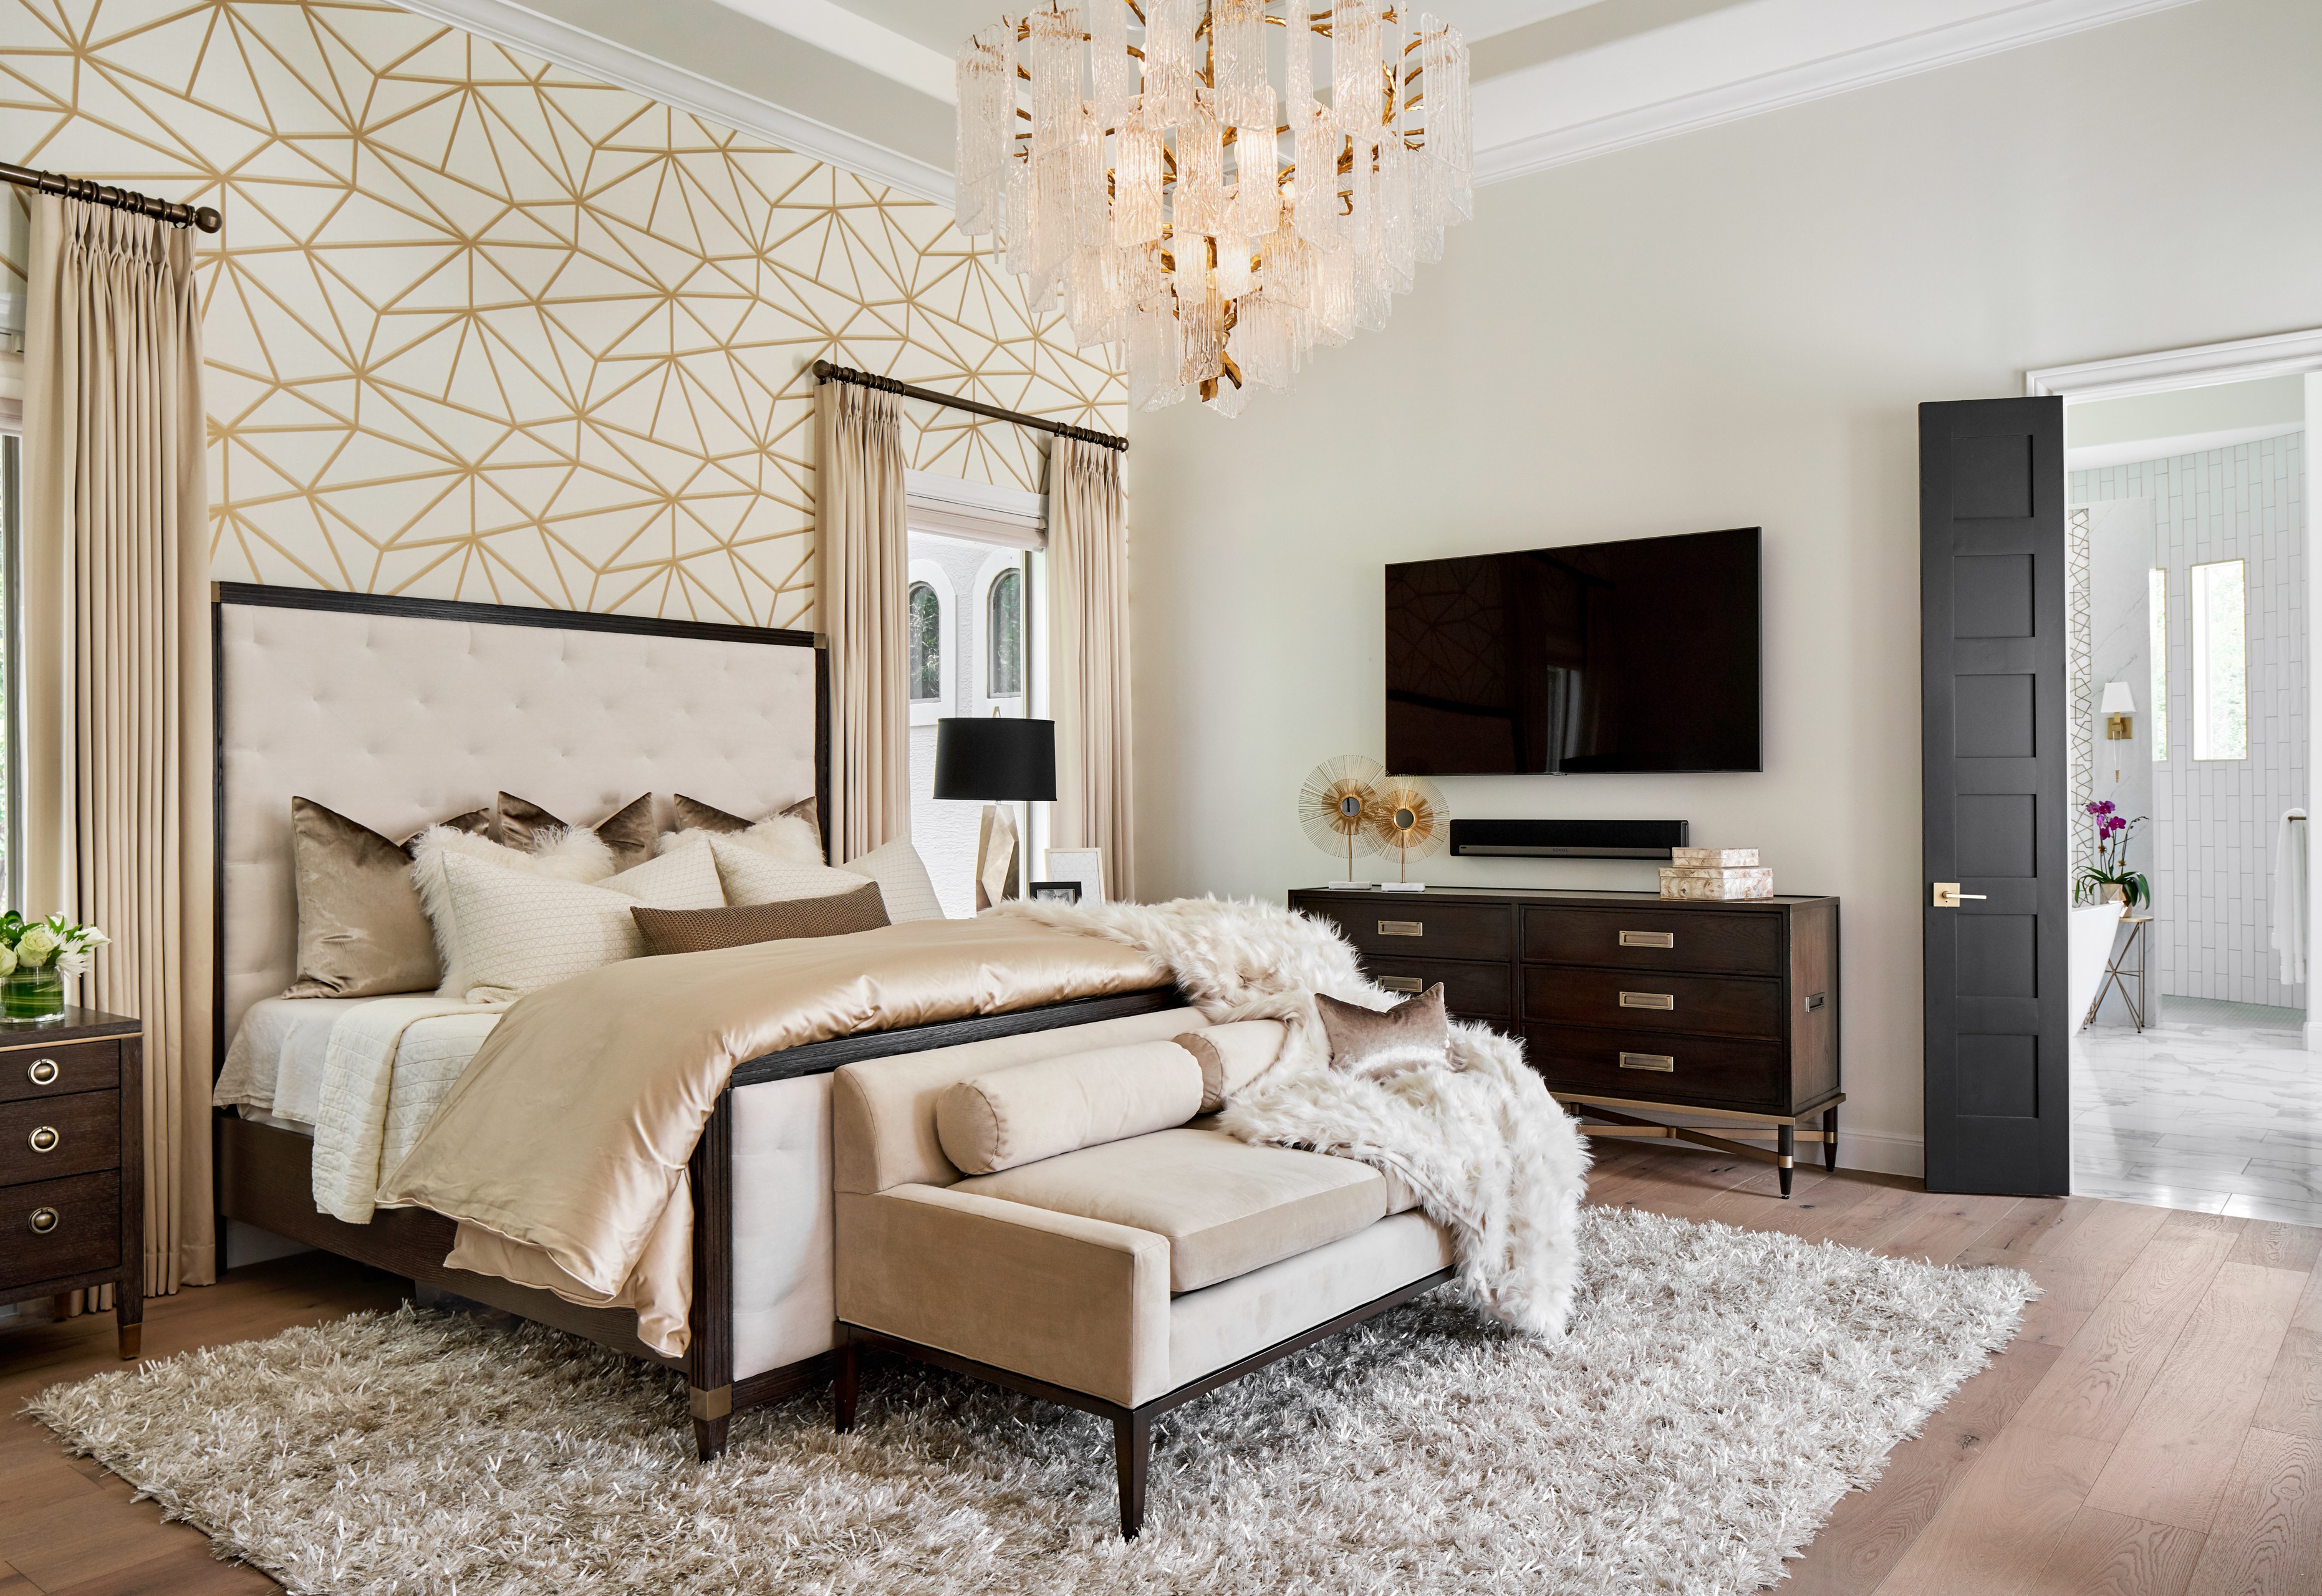 Browse Bedroom Feature Wall ideas and designs in Photos | Houzz UK